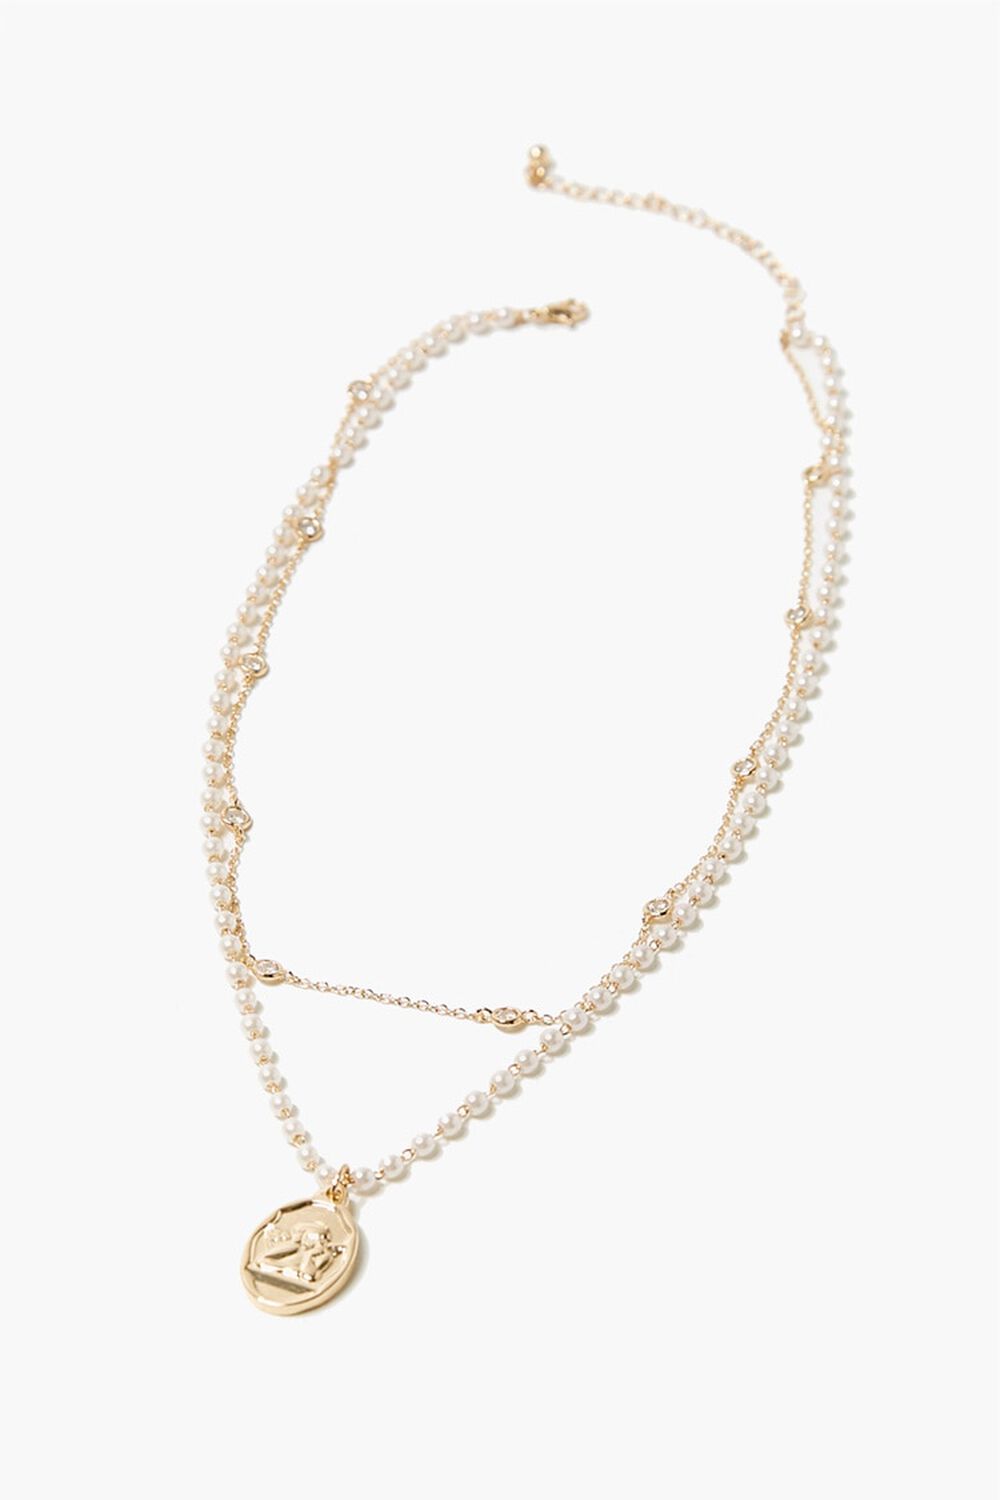 GOLD Oval Pendant Faux Pearl Necklace, image 2